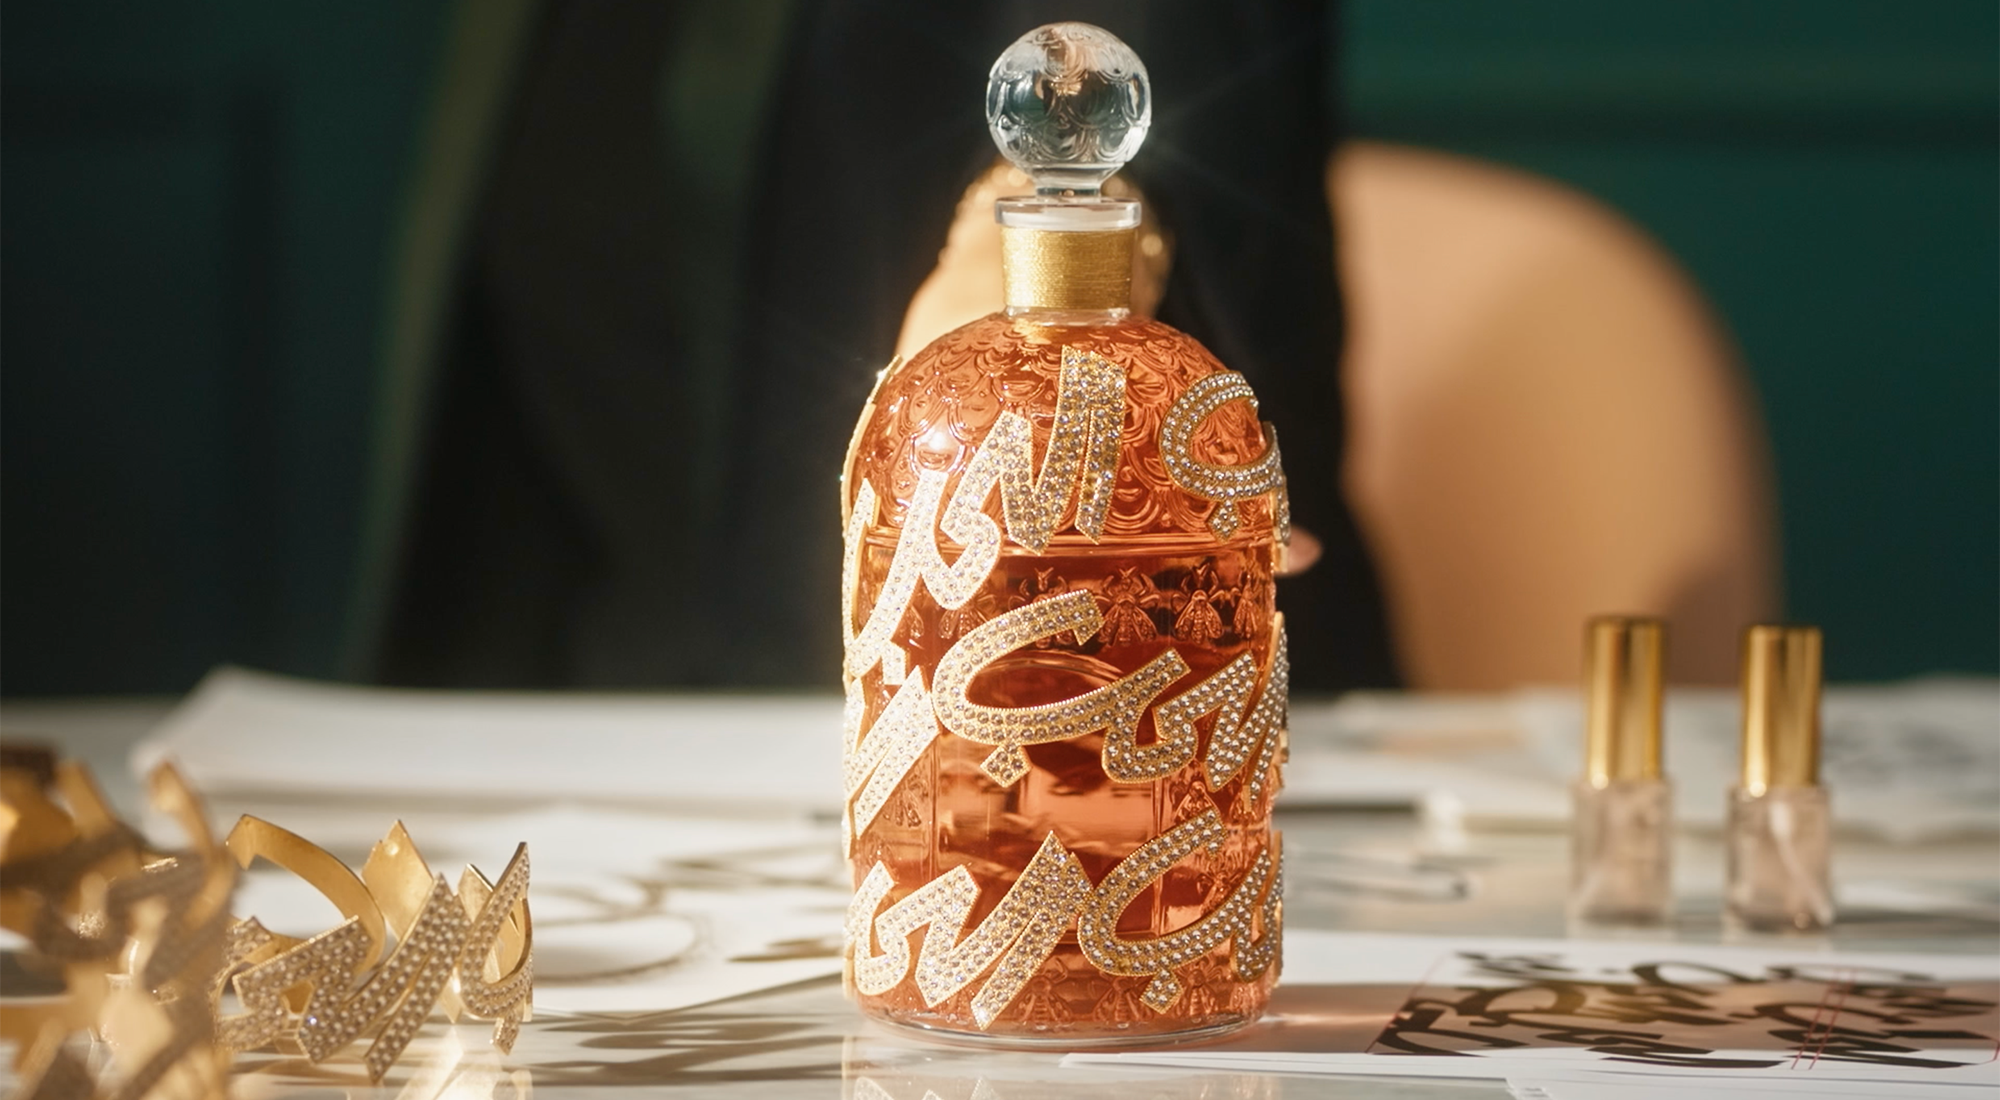 Louis Vuitton Releases Three Fragrances With Exceptional Bottle Design